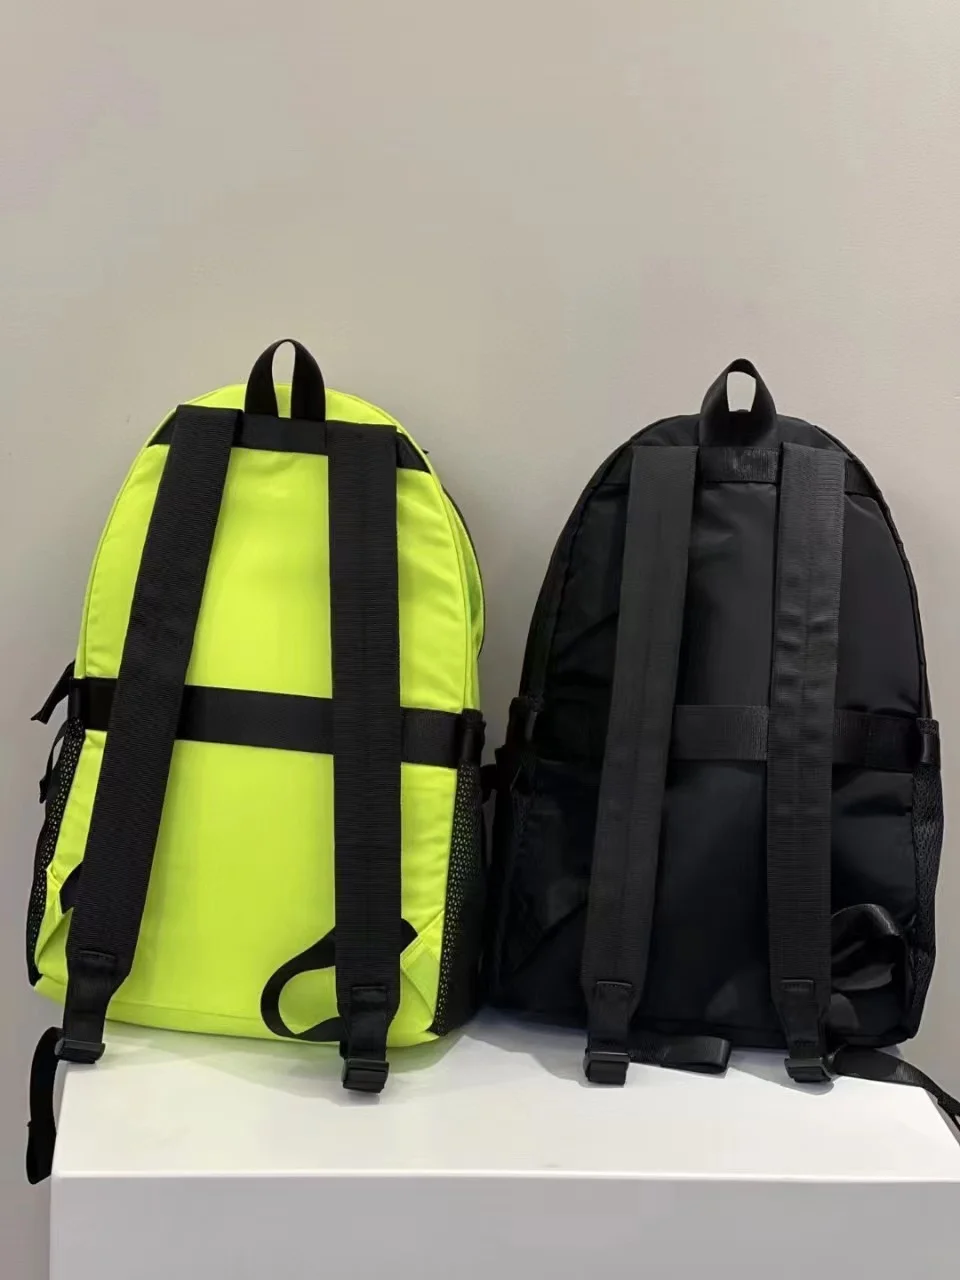 NWT Backpack  27 L Big Size Outdoor Bags Style Women Sports Bag High Quality Gym Women Handbags Gym Bags